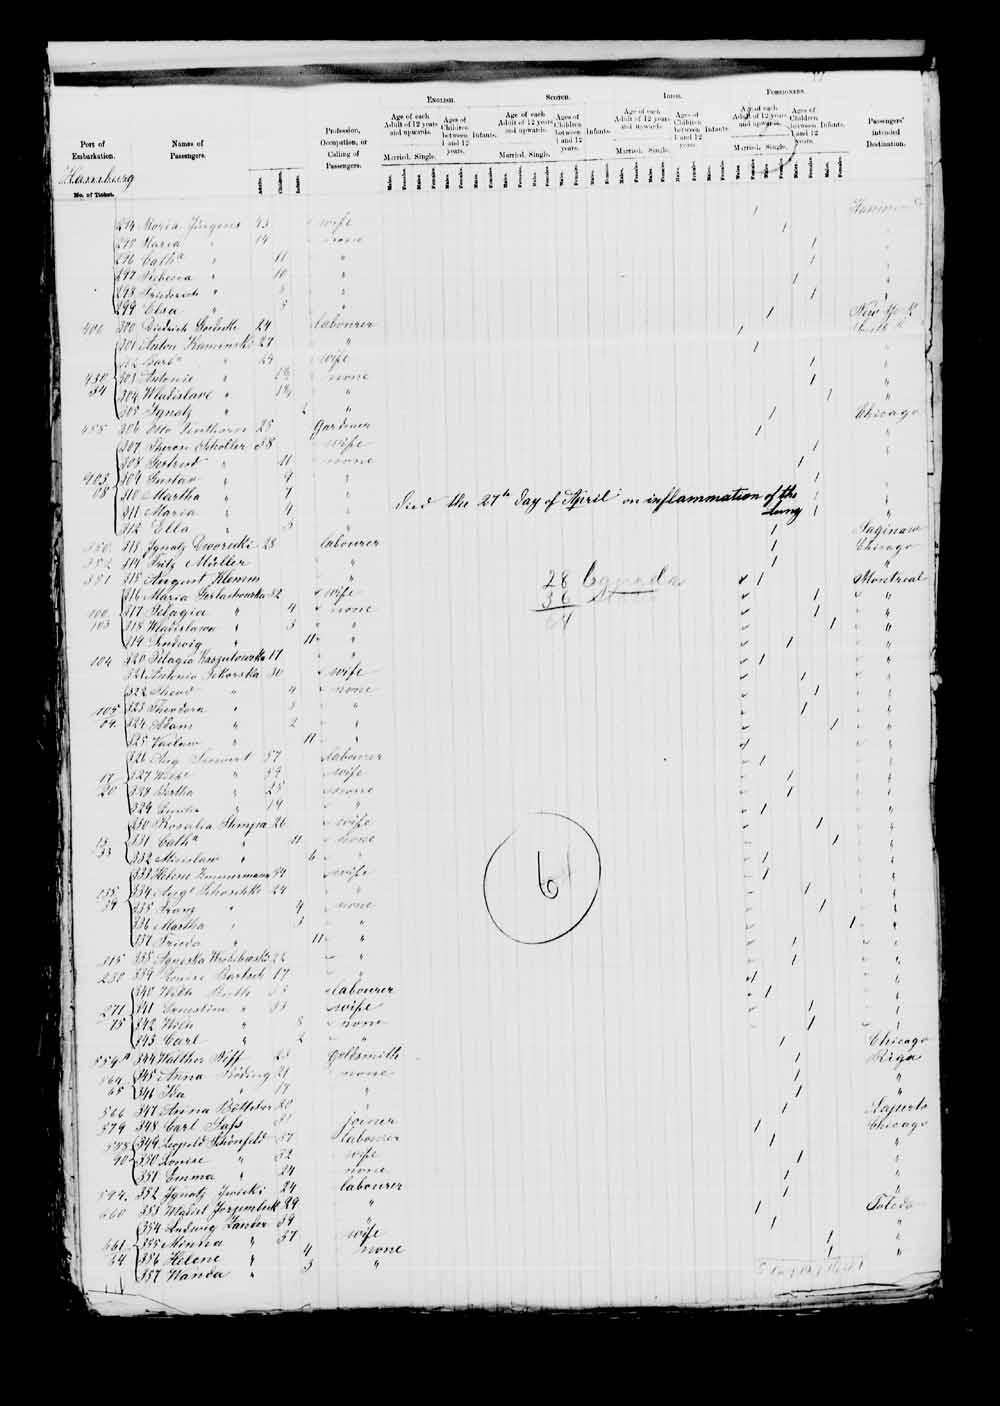 Digitized page of Quebec Passenger Lists for Image No.: e003551299